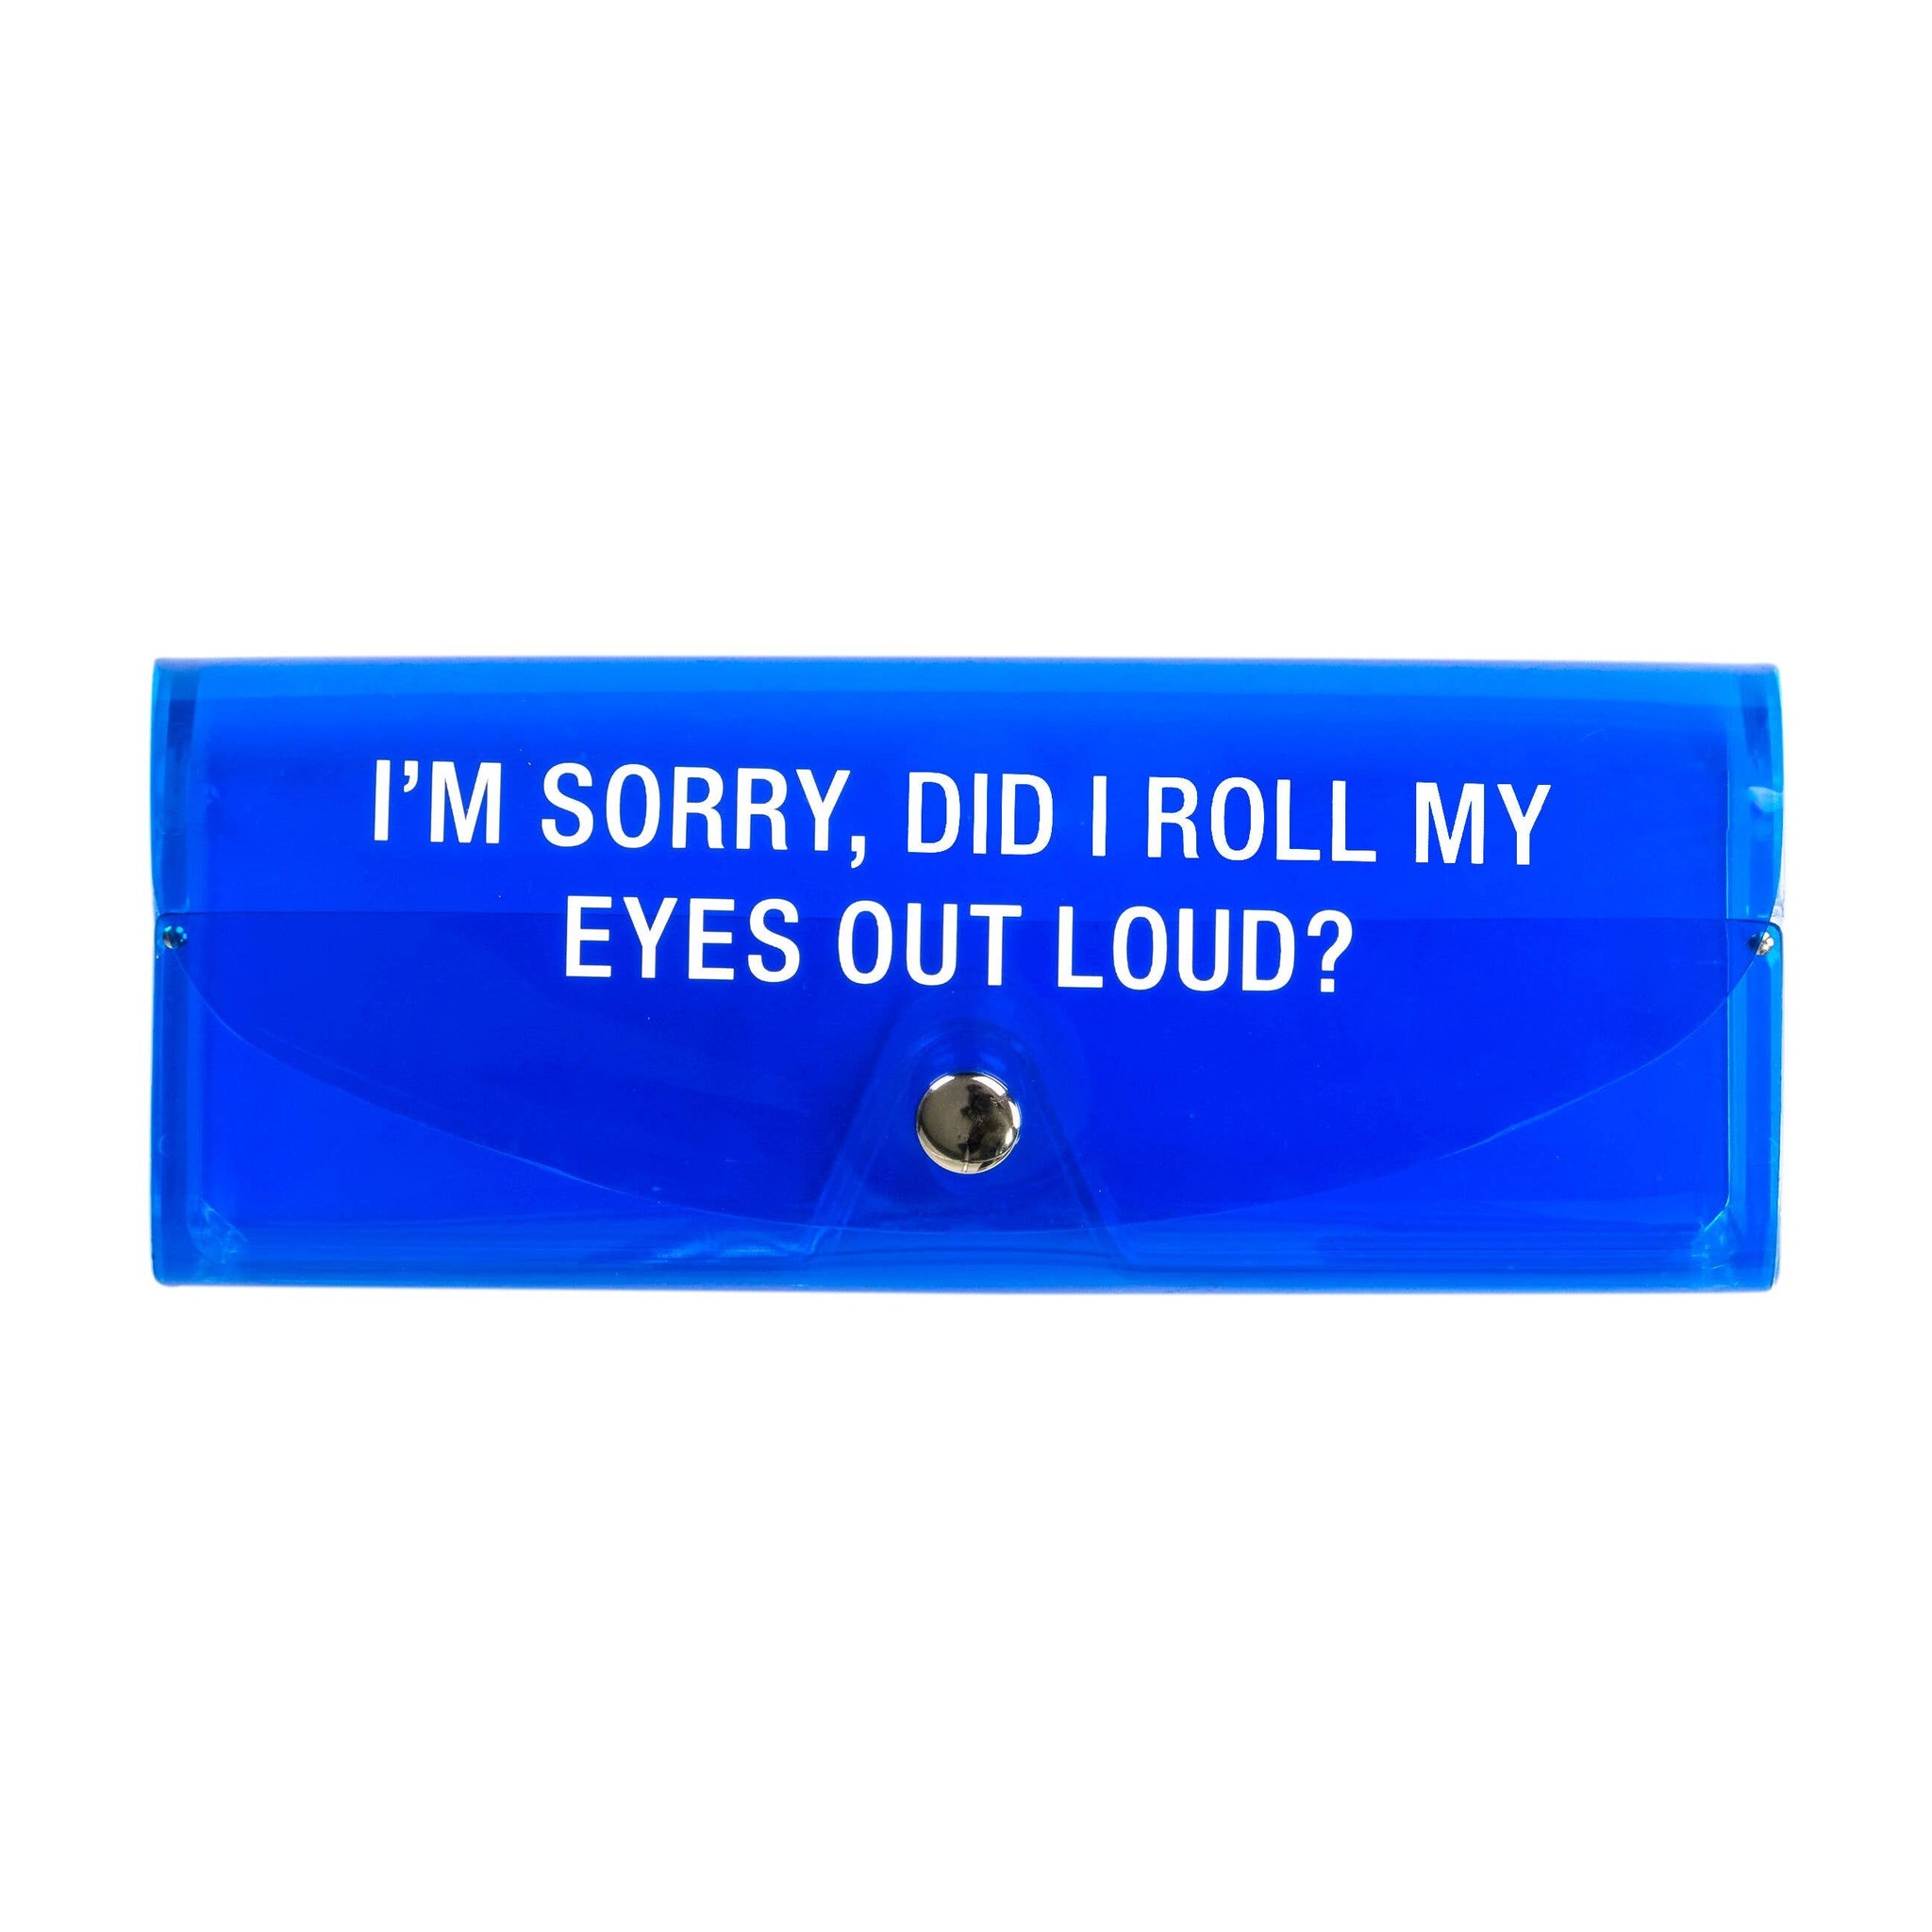 I'm Sorry, Did I Roll My Eyes Out Loud? Sunglasses Case